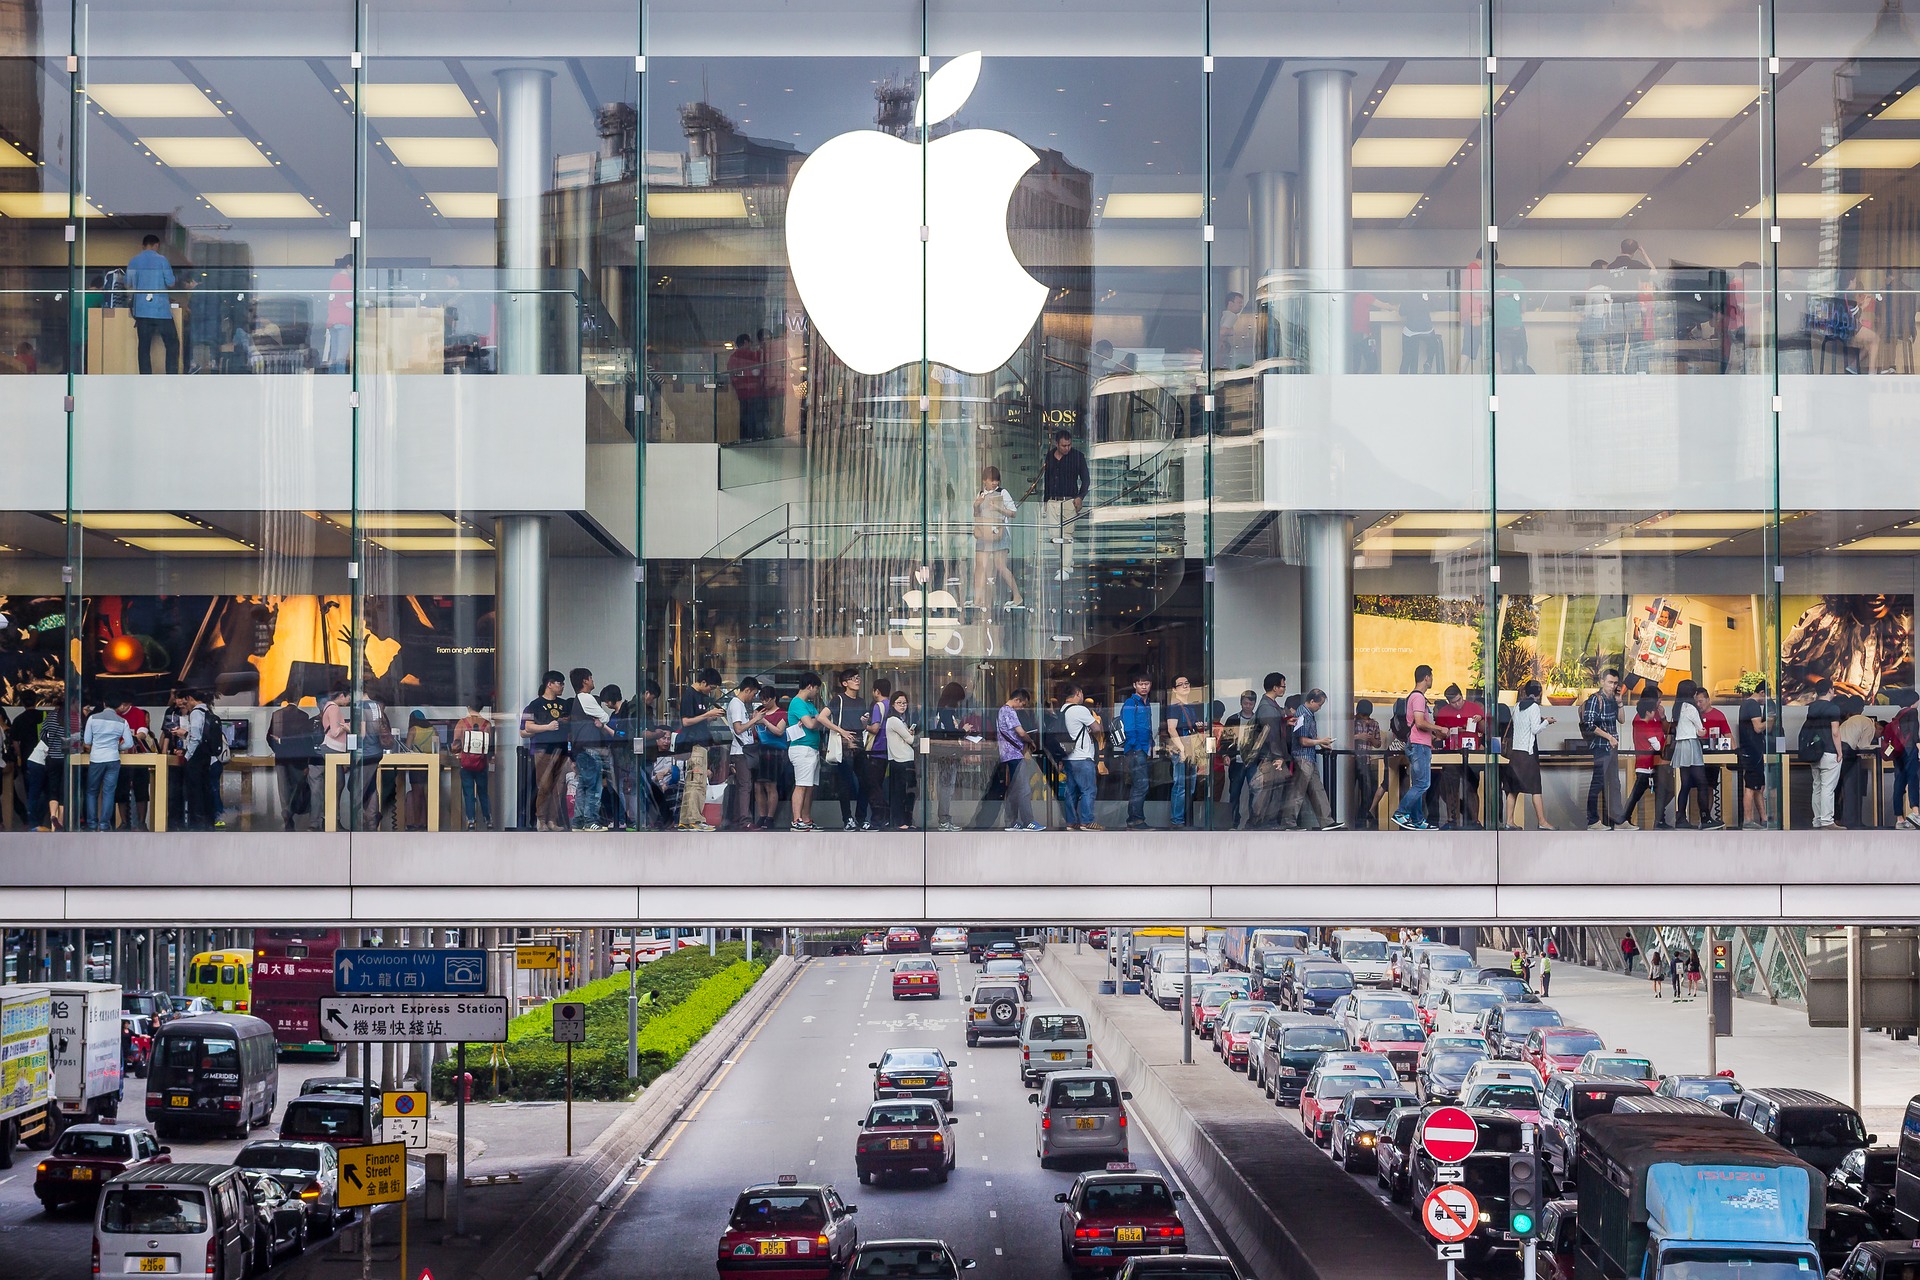 Apple is Opening the First Floating Store in the World in Singapore